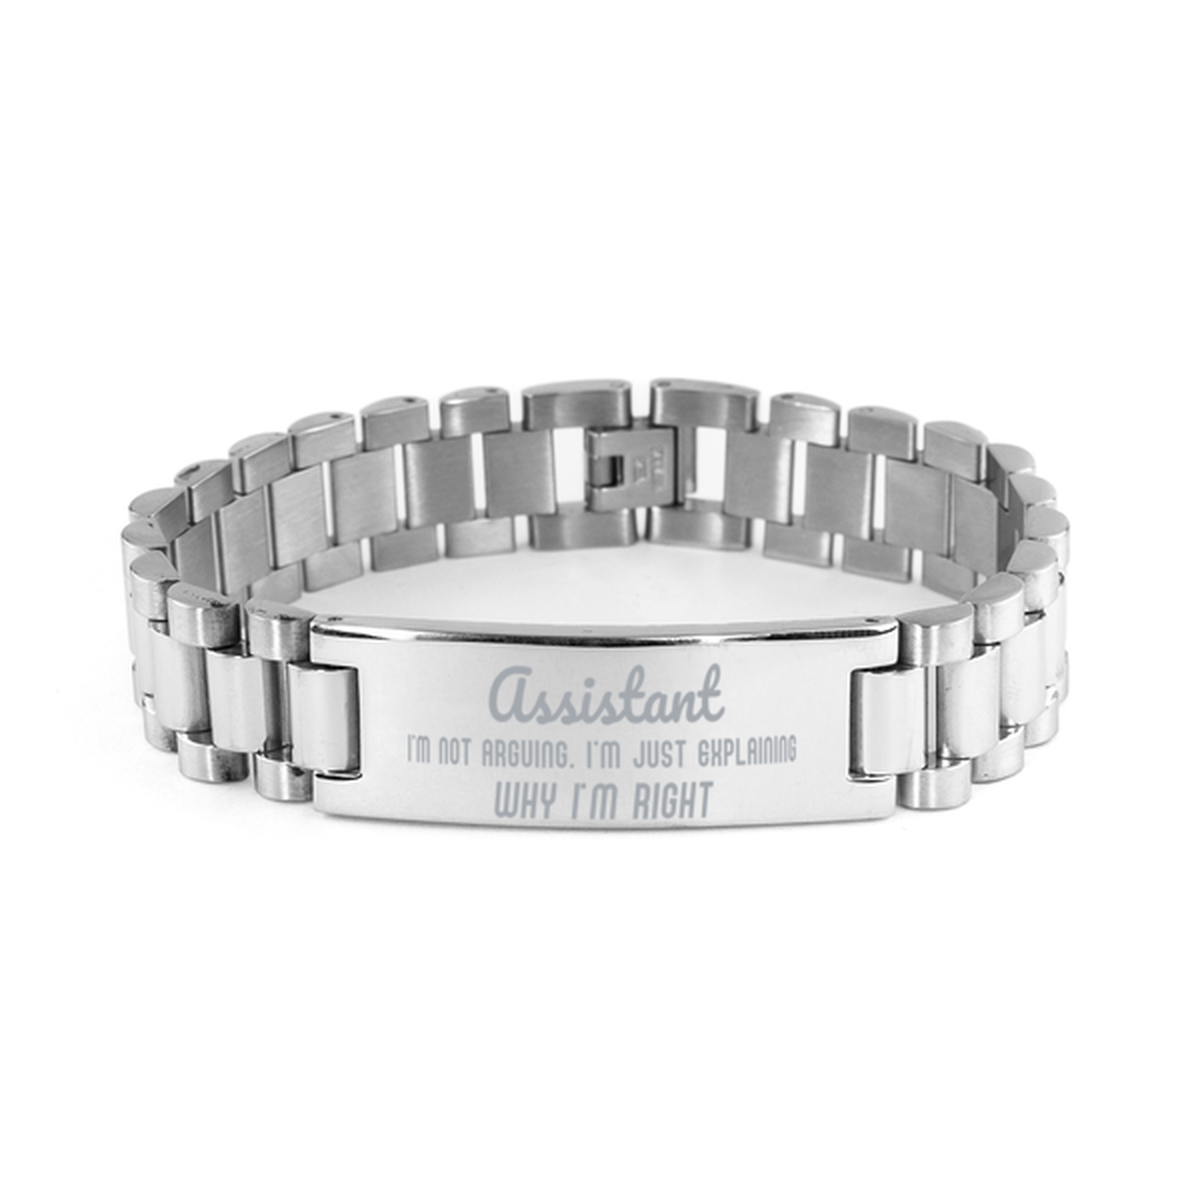 Assistant I'm not Arguing. I'm Just Explaining Why I'm RIGHT Ladder Stainless Steel Bracelet, Graduation Birthday Christmas Assistant Gifts For Assistant Funny Saying Quote Present for Men Women Coworker